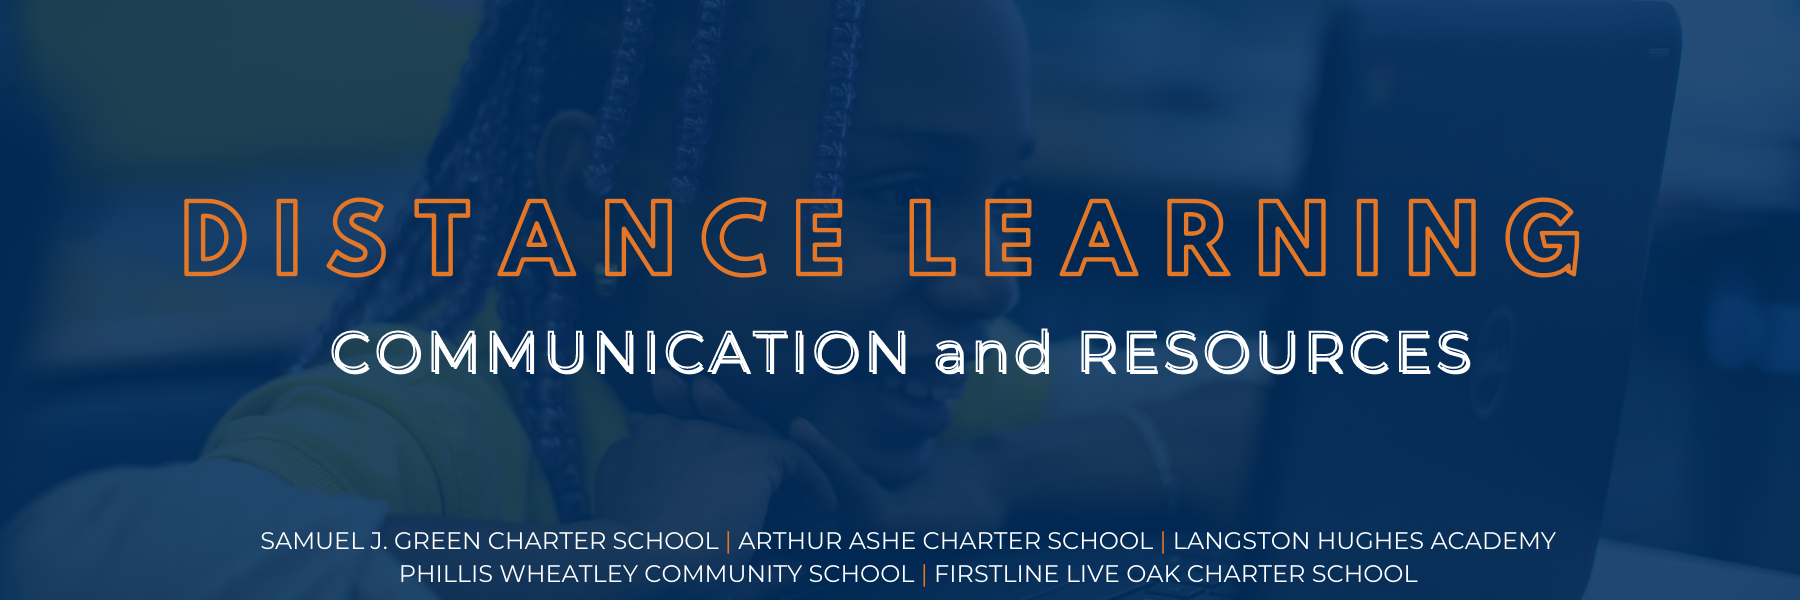 Distance Learning Communication and Resources